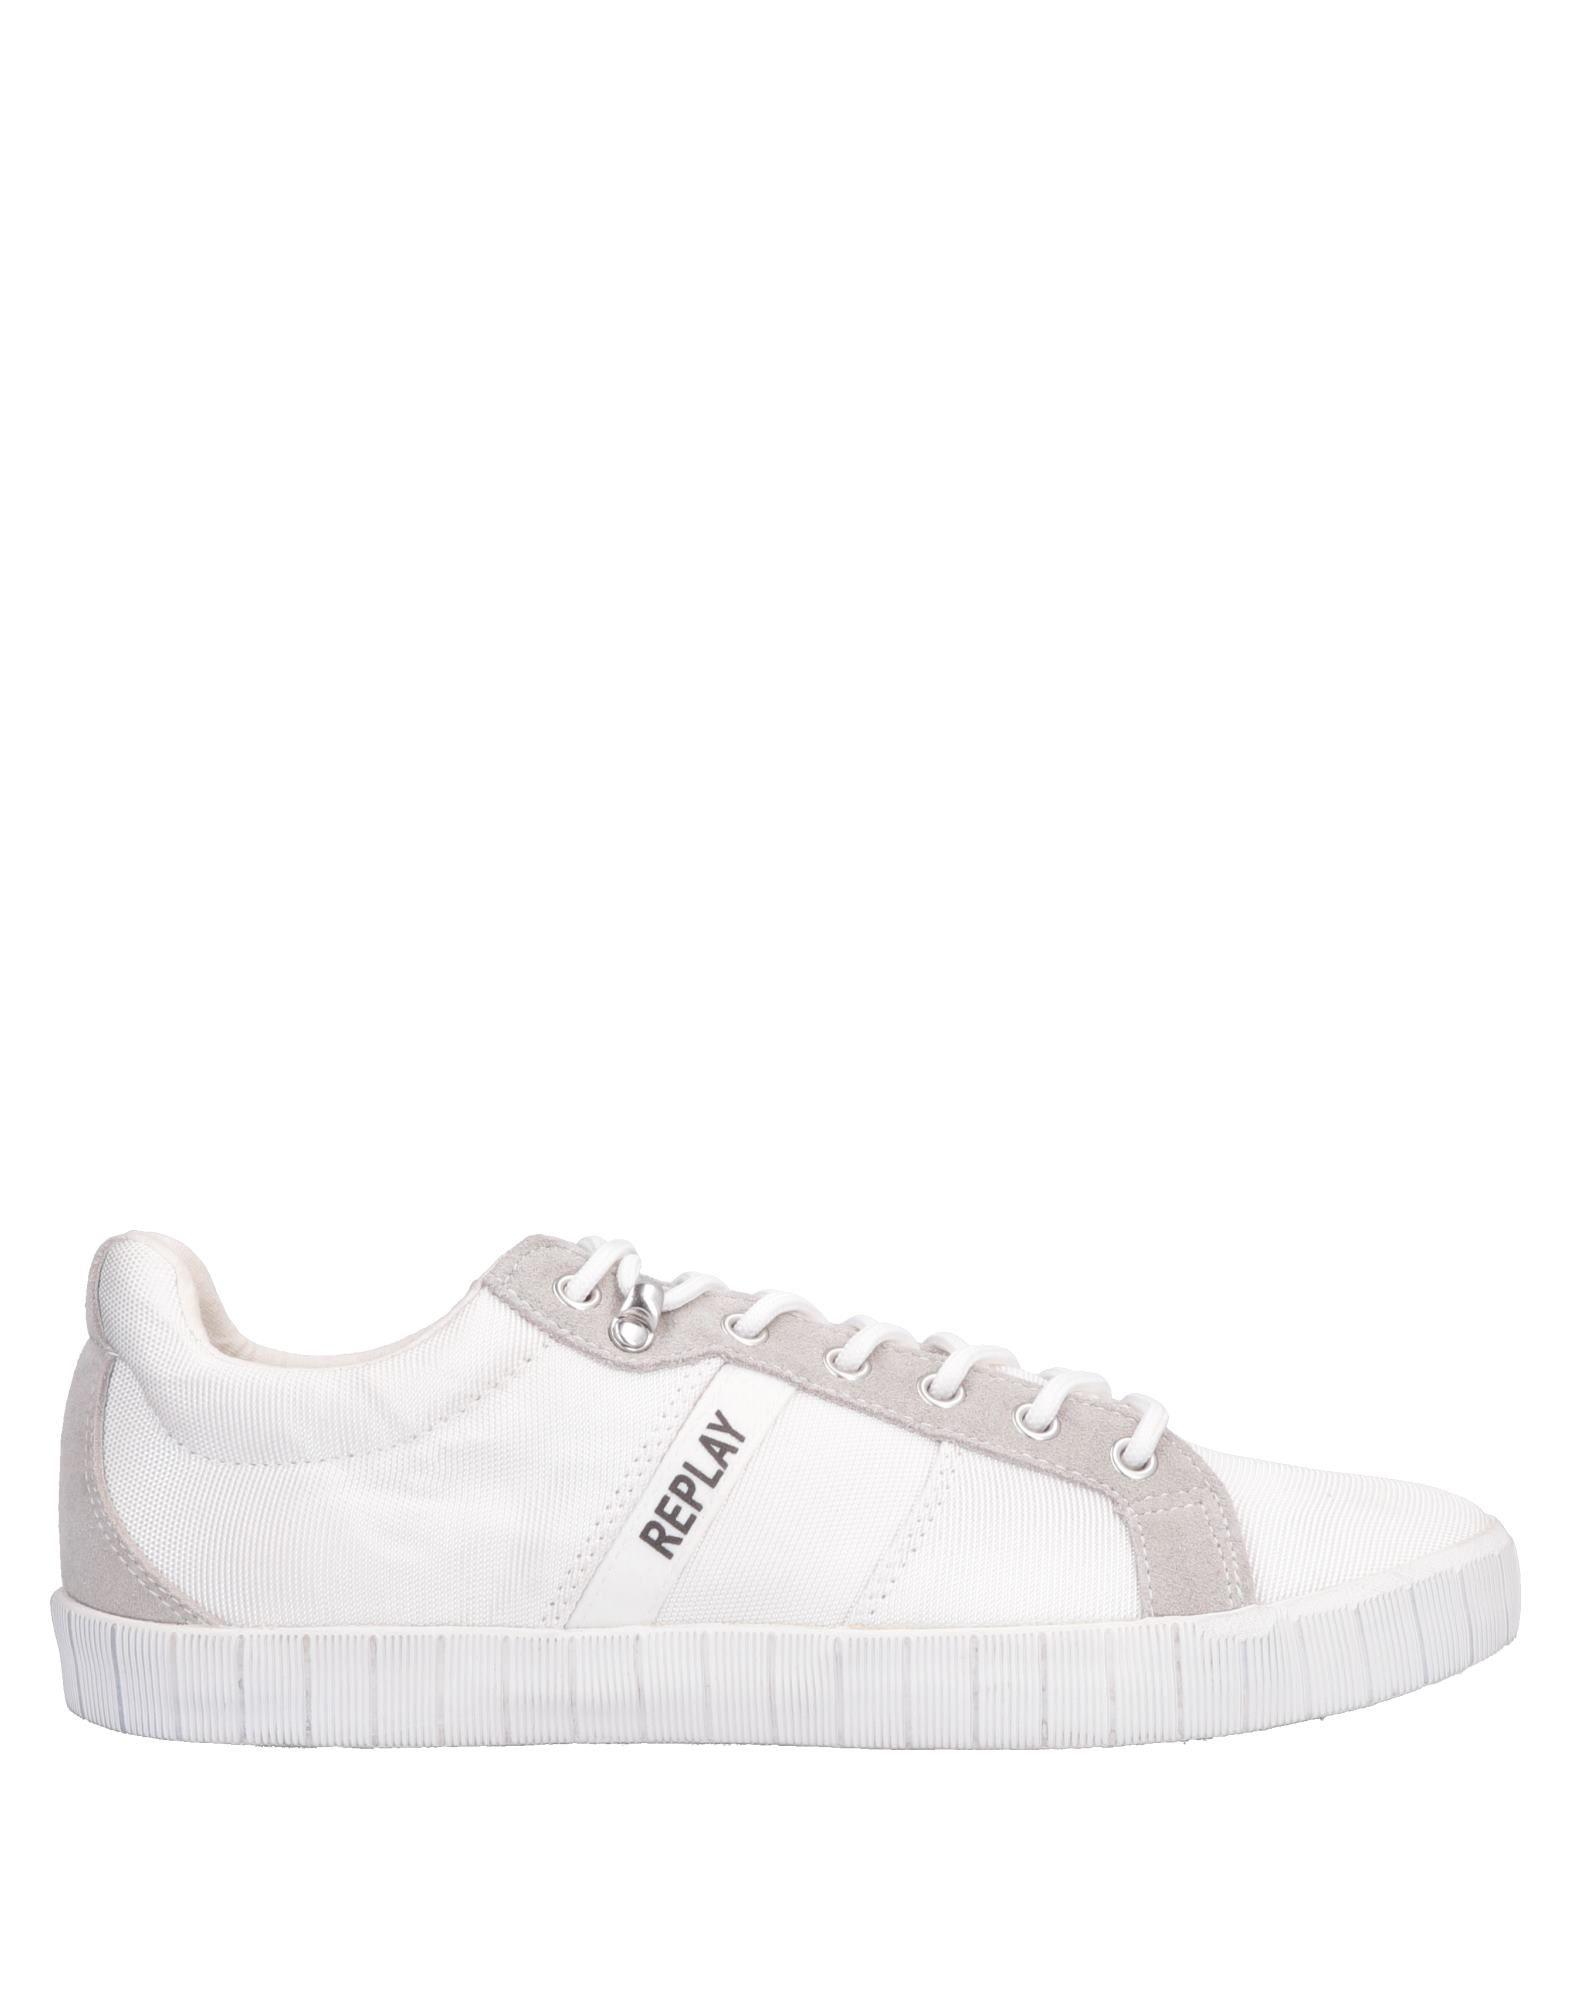 Replay Low-tops & Sneakers in White for Men - Lyst